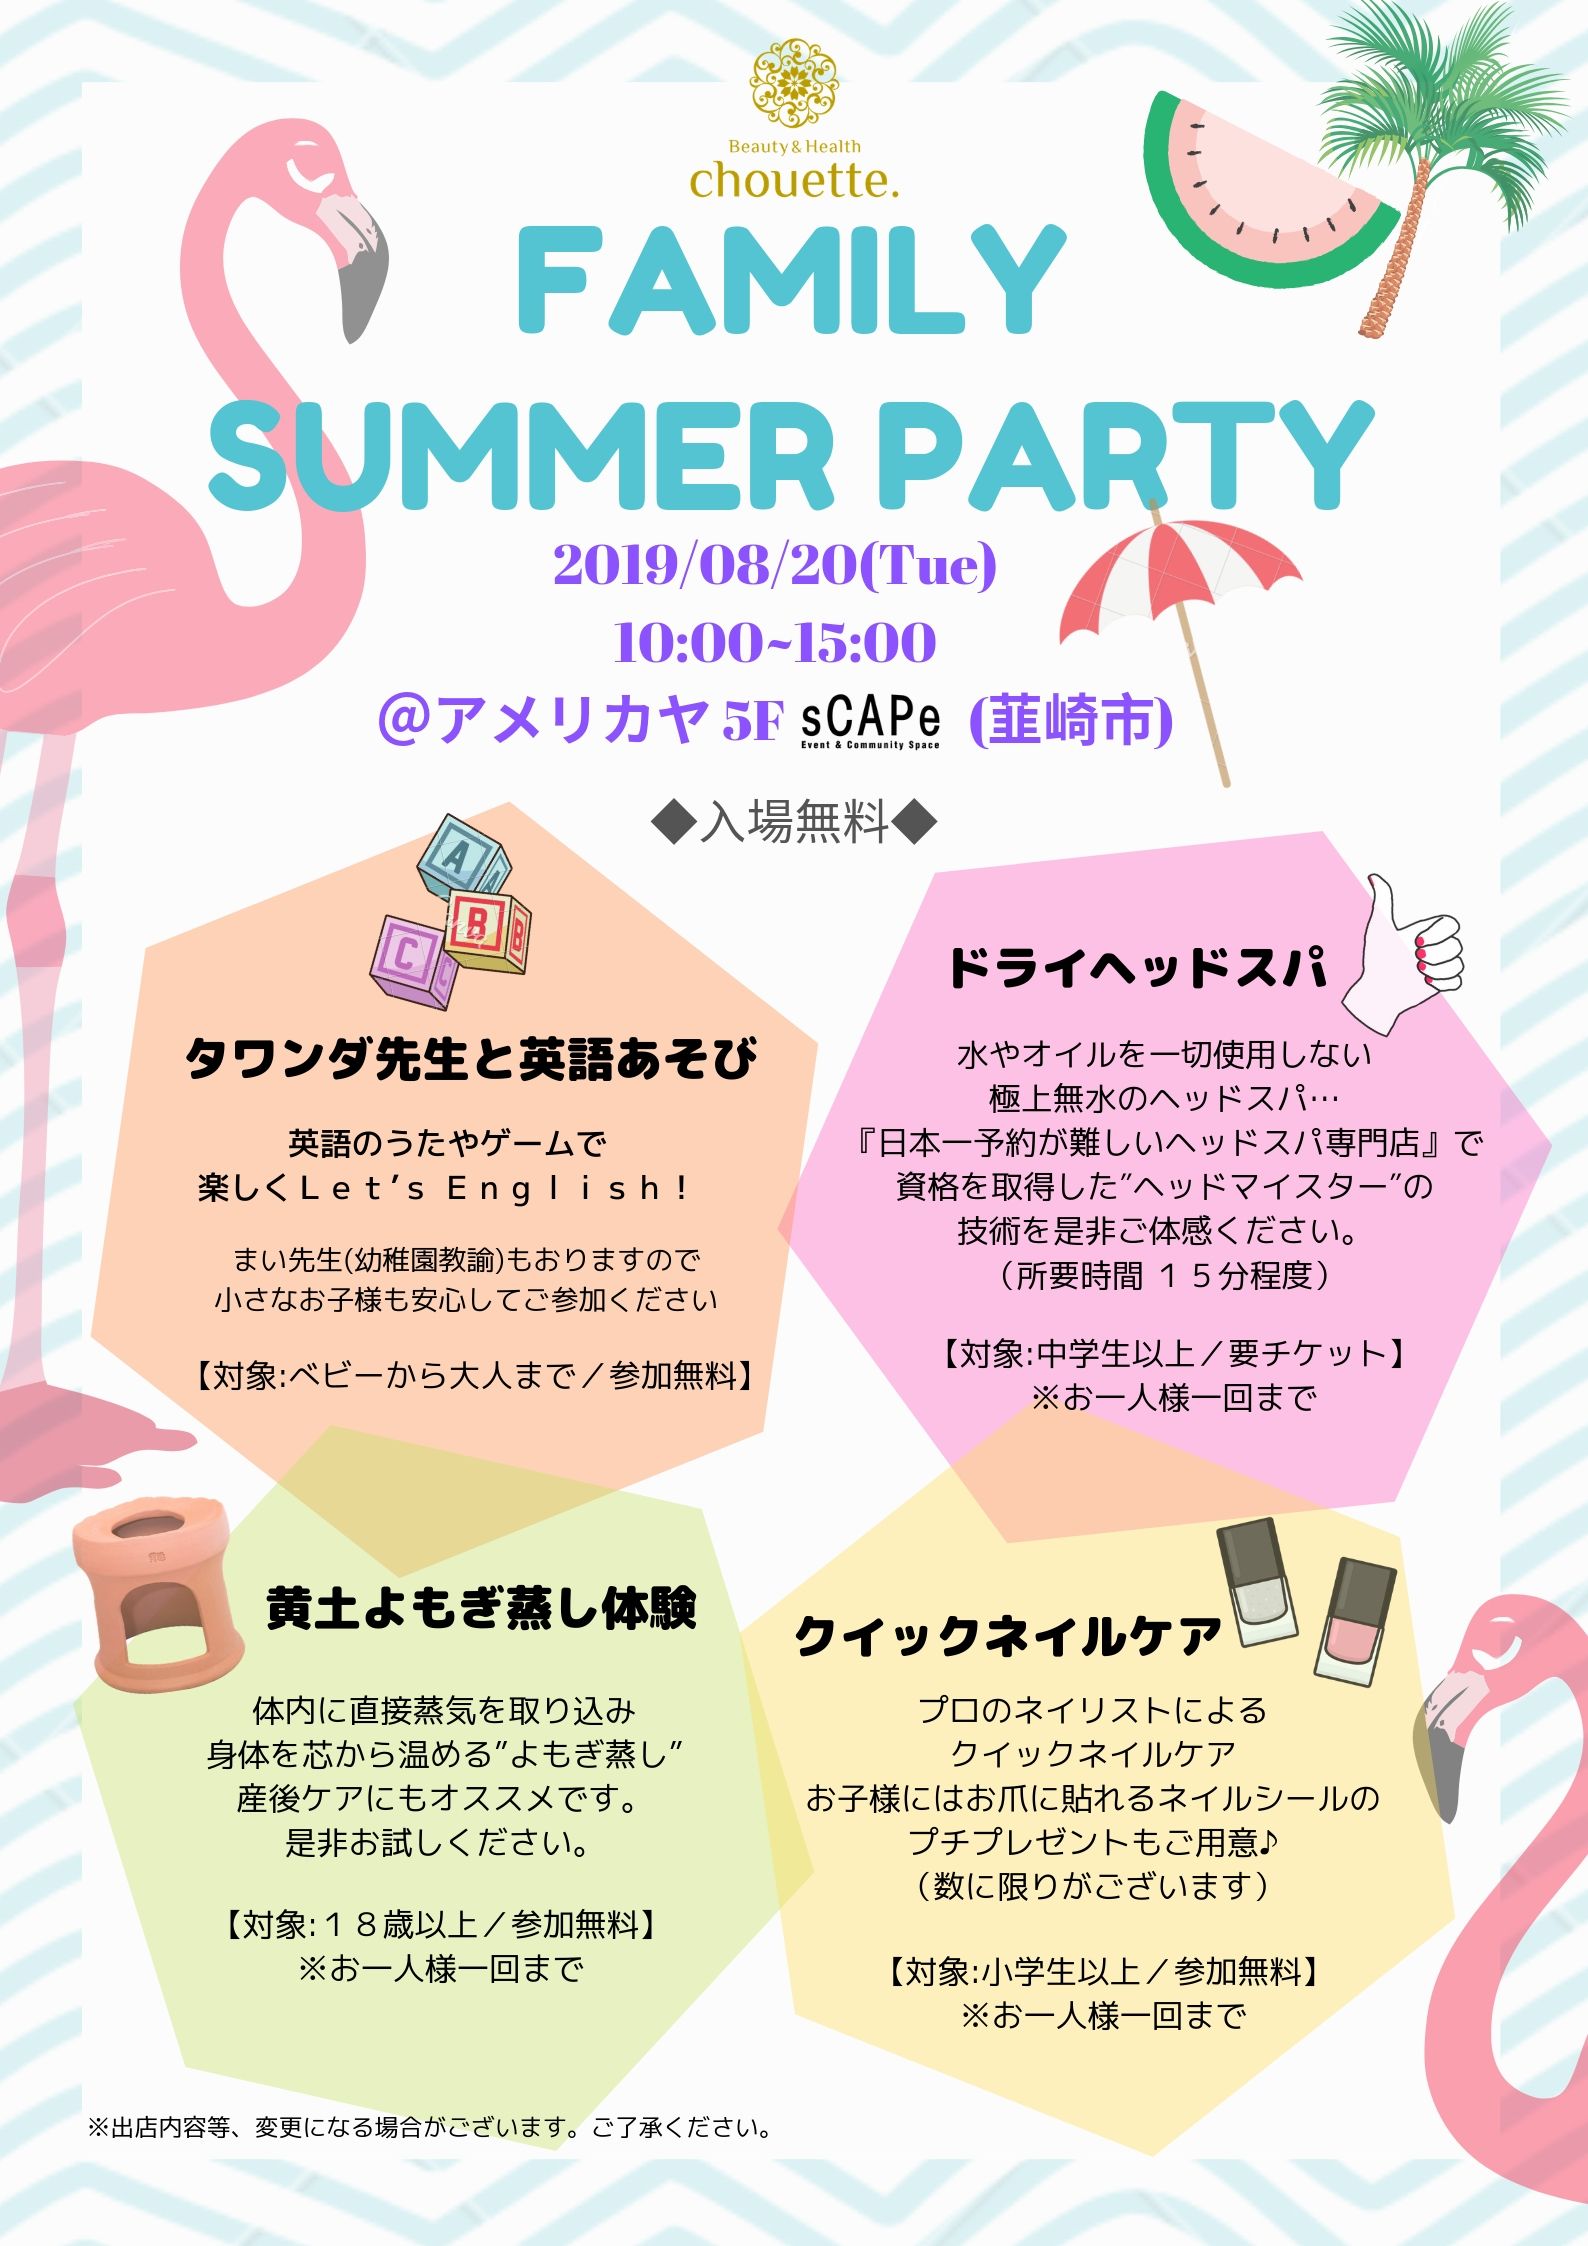 FAMILY SUMMER PARTY（8月20日）子連れでも楽しめる美容イベント